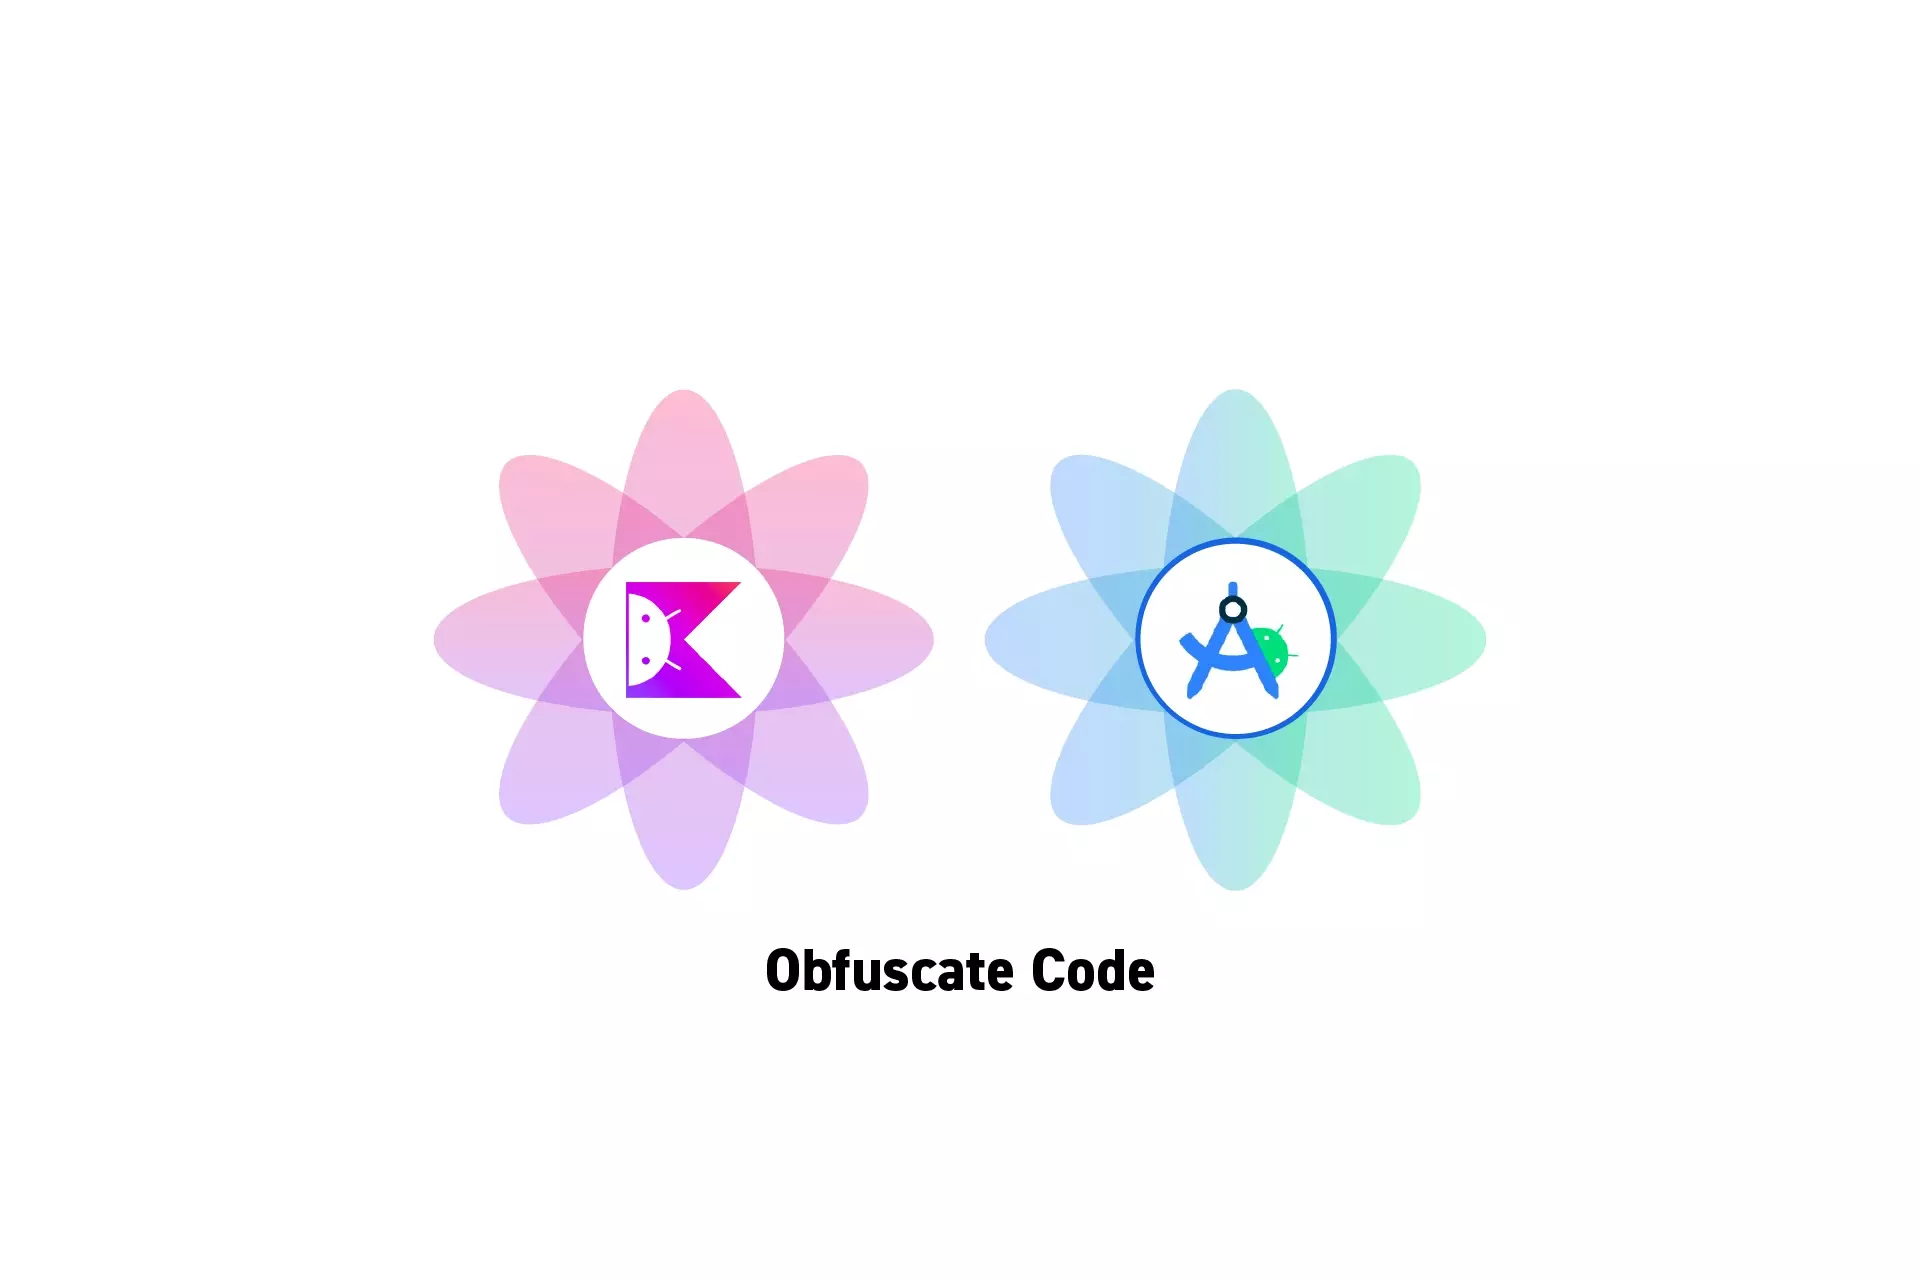 Two flowers that represent Kotlin and Android Studio. Beneath them sits the text "Obfuscate Code."